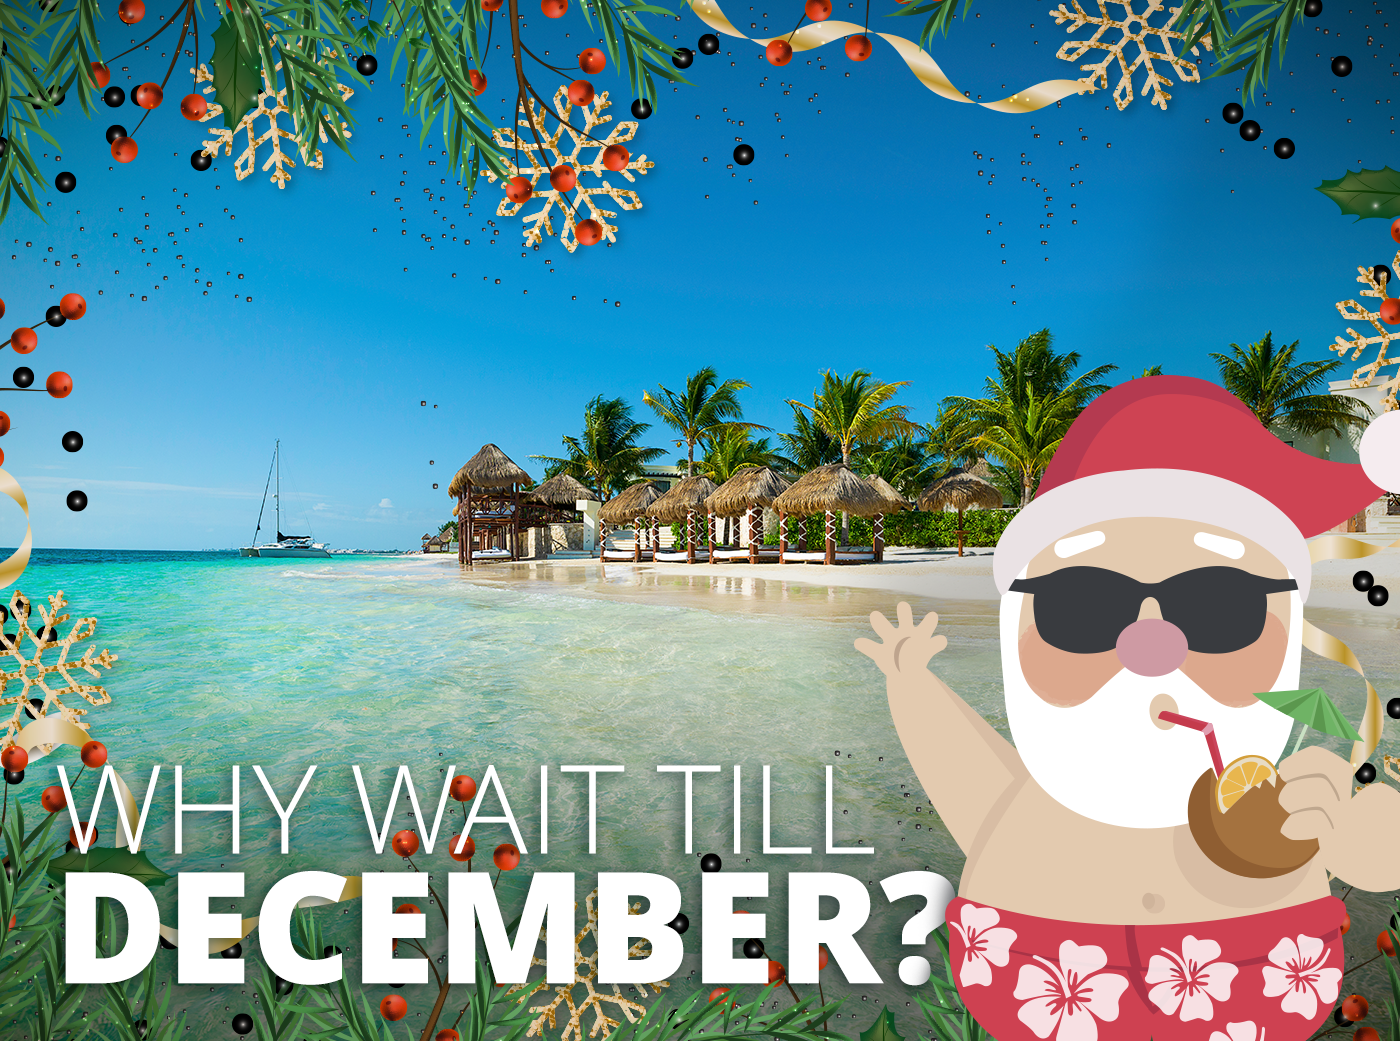 ‘Tis the season for some very magical travel deals!